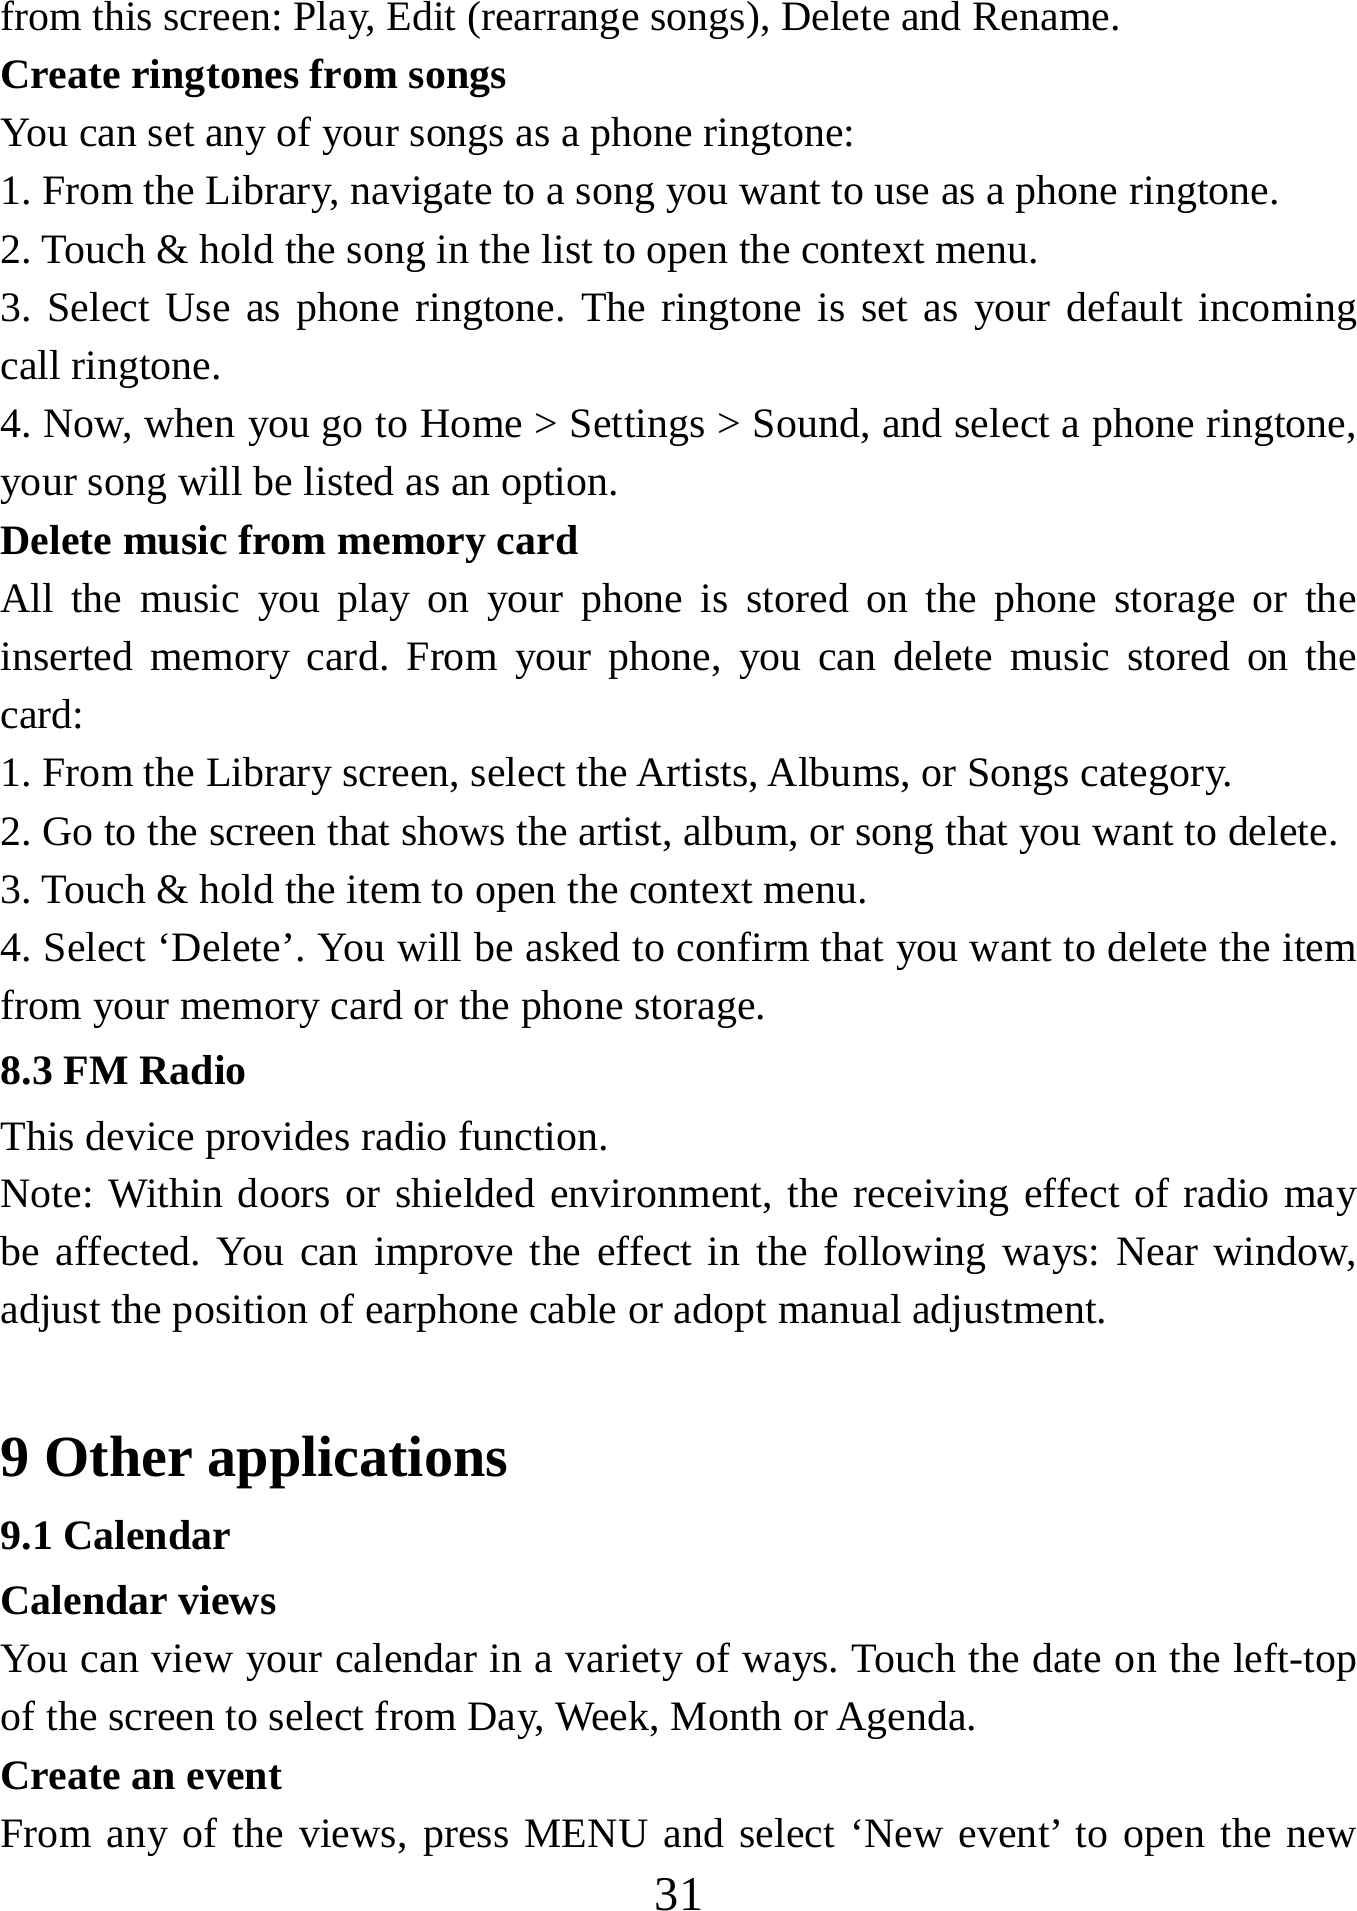   31from this screen: Play, Edit (rearrange songs), Delete and Rename. Create ringtones from songs   You can set any of your songs as a phone ringtone:   1. From the Library, navigate to a song you want to use as a phone ringtone.   2. Touch &amp; hold the song in the list to open the context menu.   3. Select Use as phone ringtone. The ringtone is set as your default incoming call ringtone.   4. Now, when you go to Home &gt; Settings &gt; Sound, and select a phone ringtone, your song will be listed as an option. Delete music from memory card   All the music you play on your phone is stored on the phone storage or the inserted memory card. From your phone, you can delete music stored on the card:  1. From the Library screen, select the Artists, Albums, or Songs category.   2. Go to the screen that shows the artist, album, or song that you want to delete.   3. Touch &amp; hold the item to open the context menu.   4. Select ‘Delete’. You will be asked to confirm that you want to delete the item from your memory card or the phone storage. 8.3 FM Radio This device provides radio function.   Note: Within doors or shielded environment, the receiving effect of radio may be affected. You can improve the effect in the following ways: Near window, adjust the position of earphone cable or adopt manual adjustment.    9 Other applications 9.1 Calendar Calendar views   You can view your calendar in a variety of ways. Touch the date on the left-top of the screen to select from Day, Week, Month or Agenda.   Create an event   From any of the views, press MENU and select ‘New event’ to open the new 